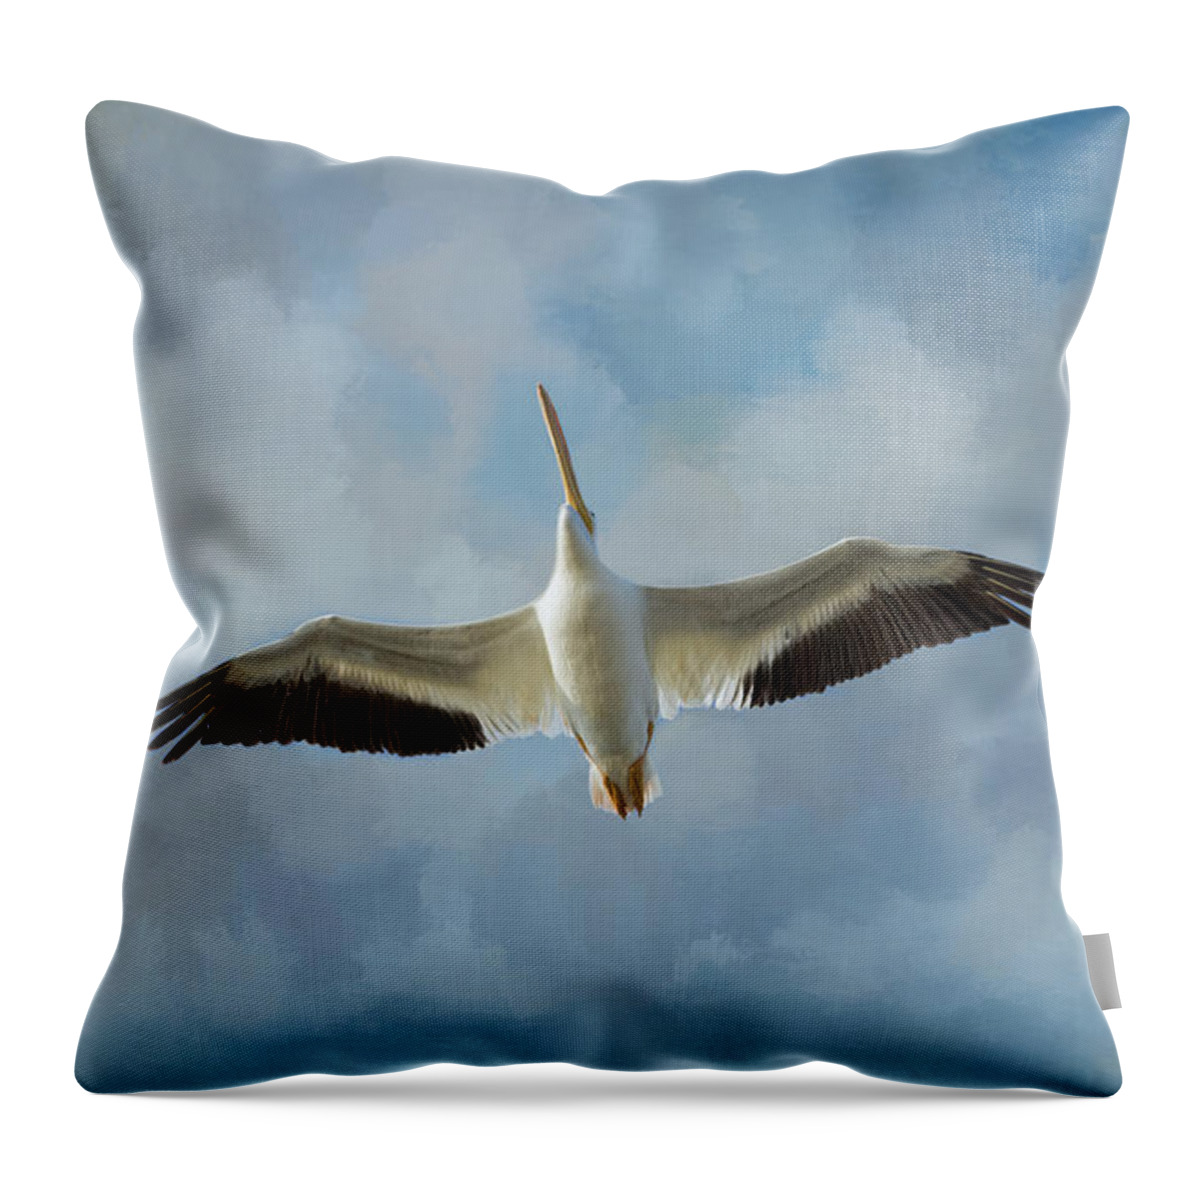 Pelican Throw Pillow featuring the photograph Soaring High by Kim Hojnacki